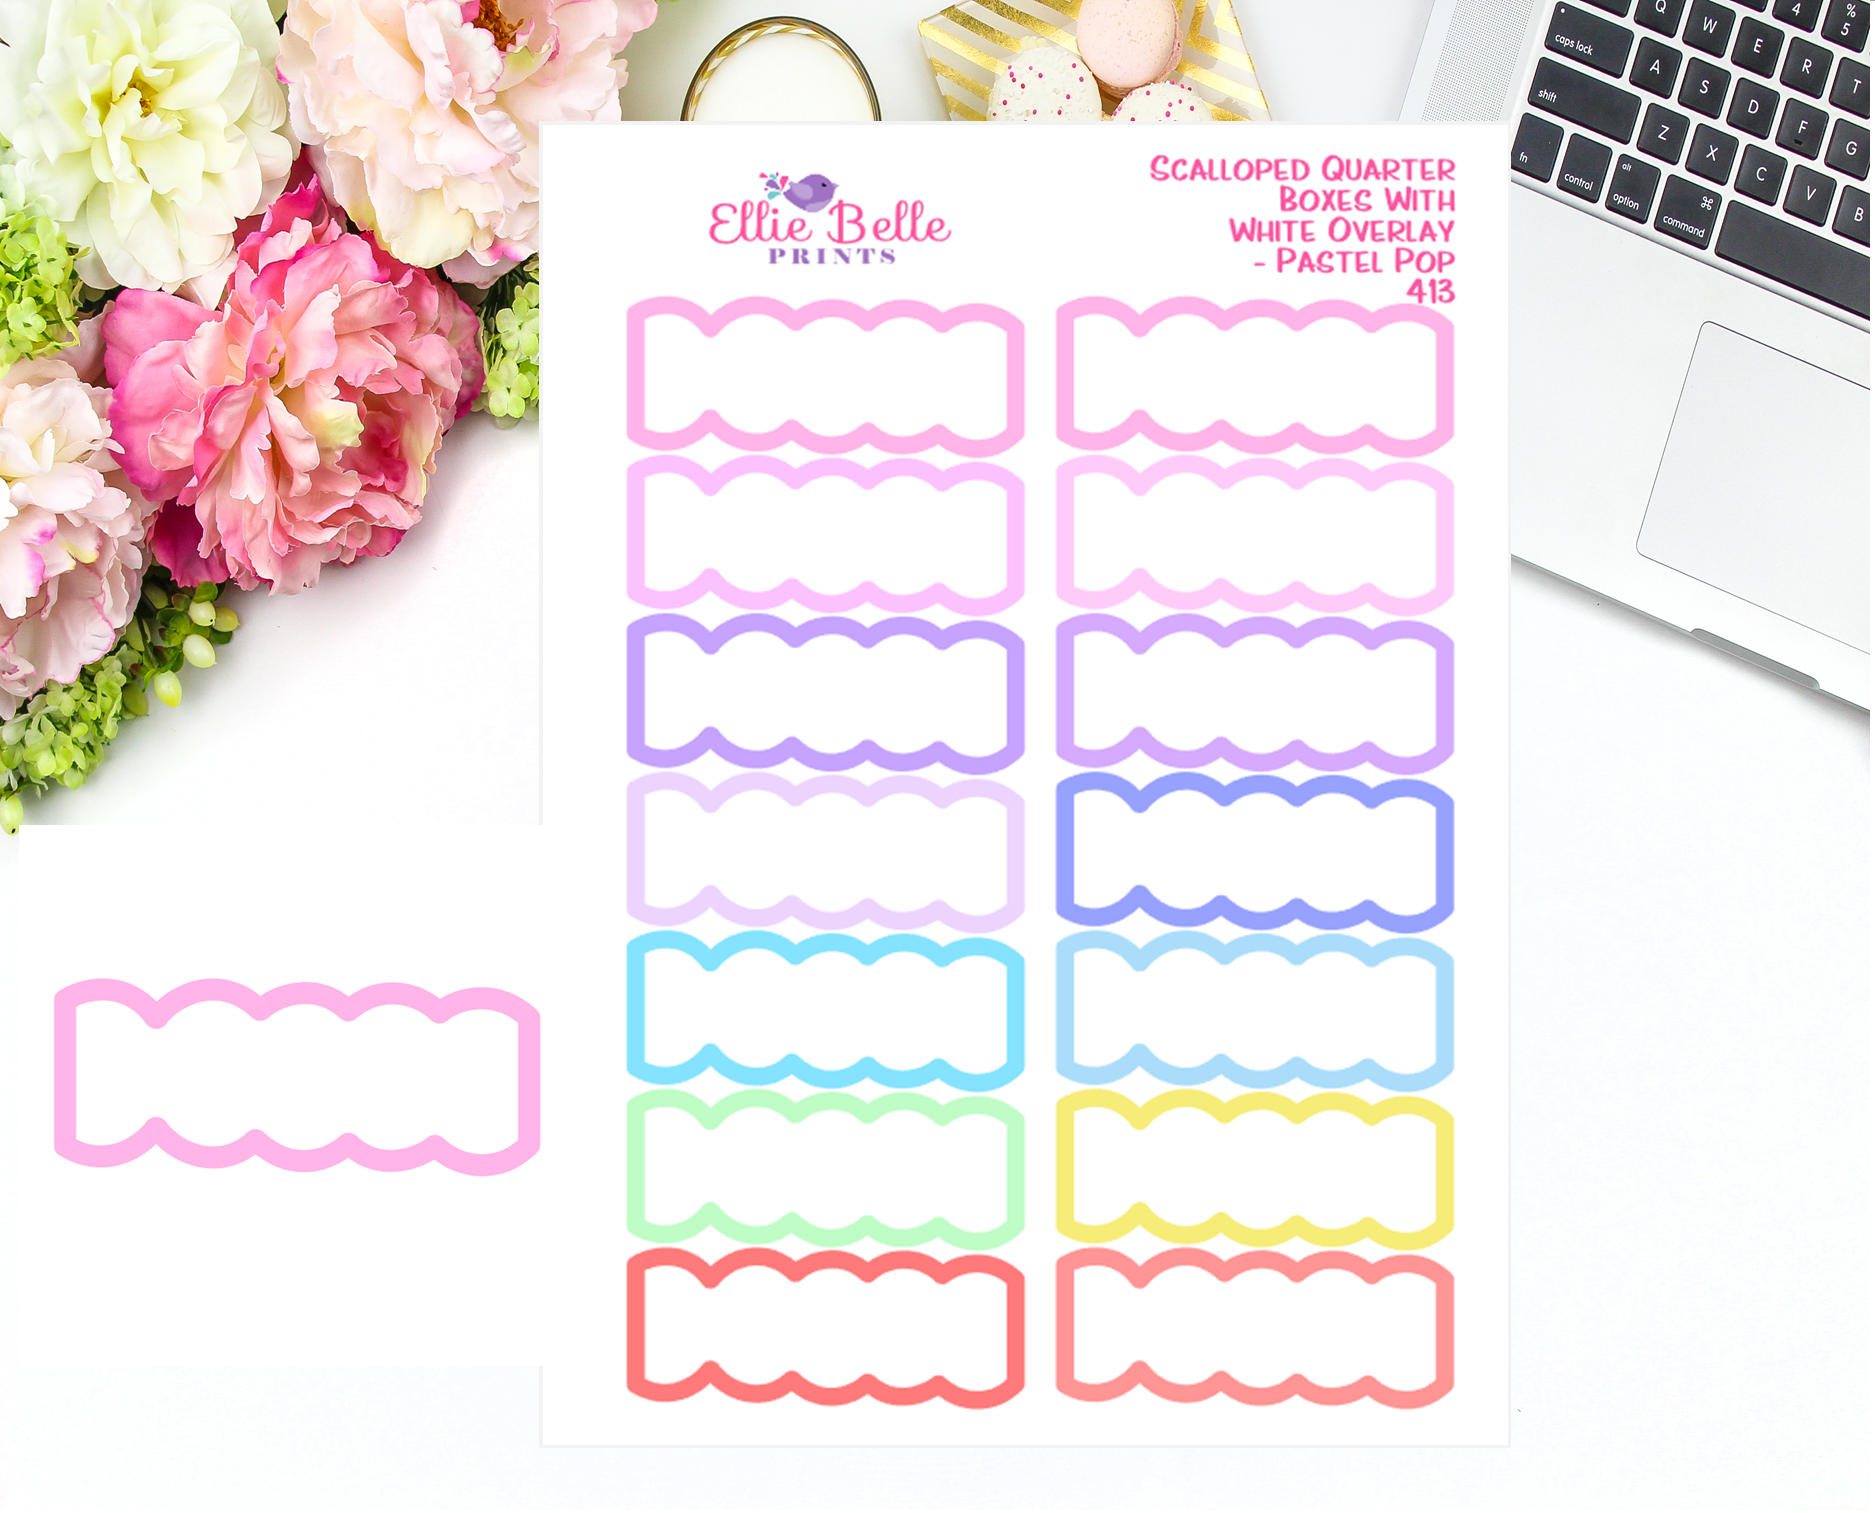 Scalloped Quarter Box With White Overlay Stickers - Pastel Pop